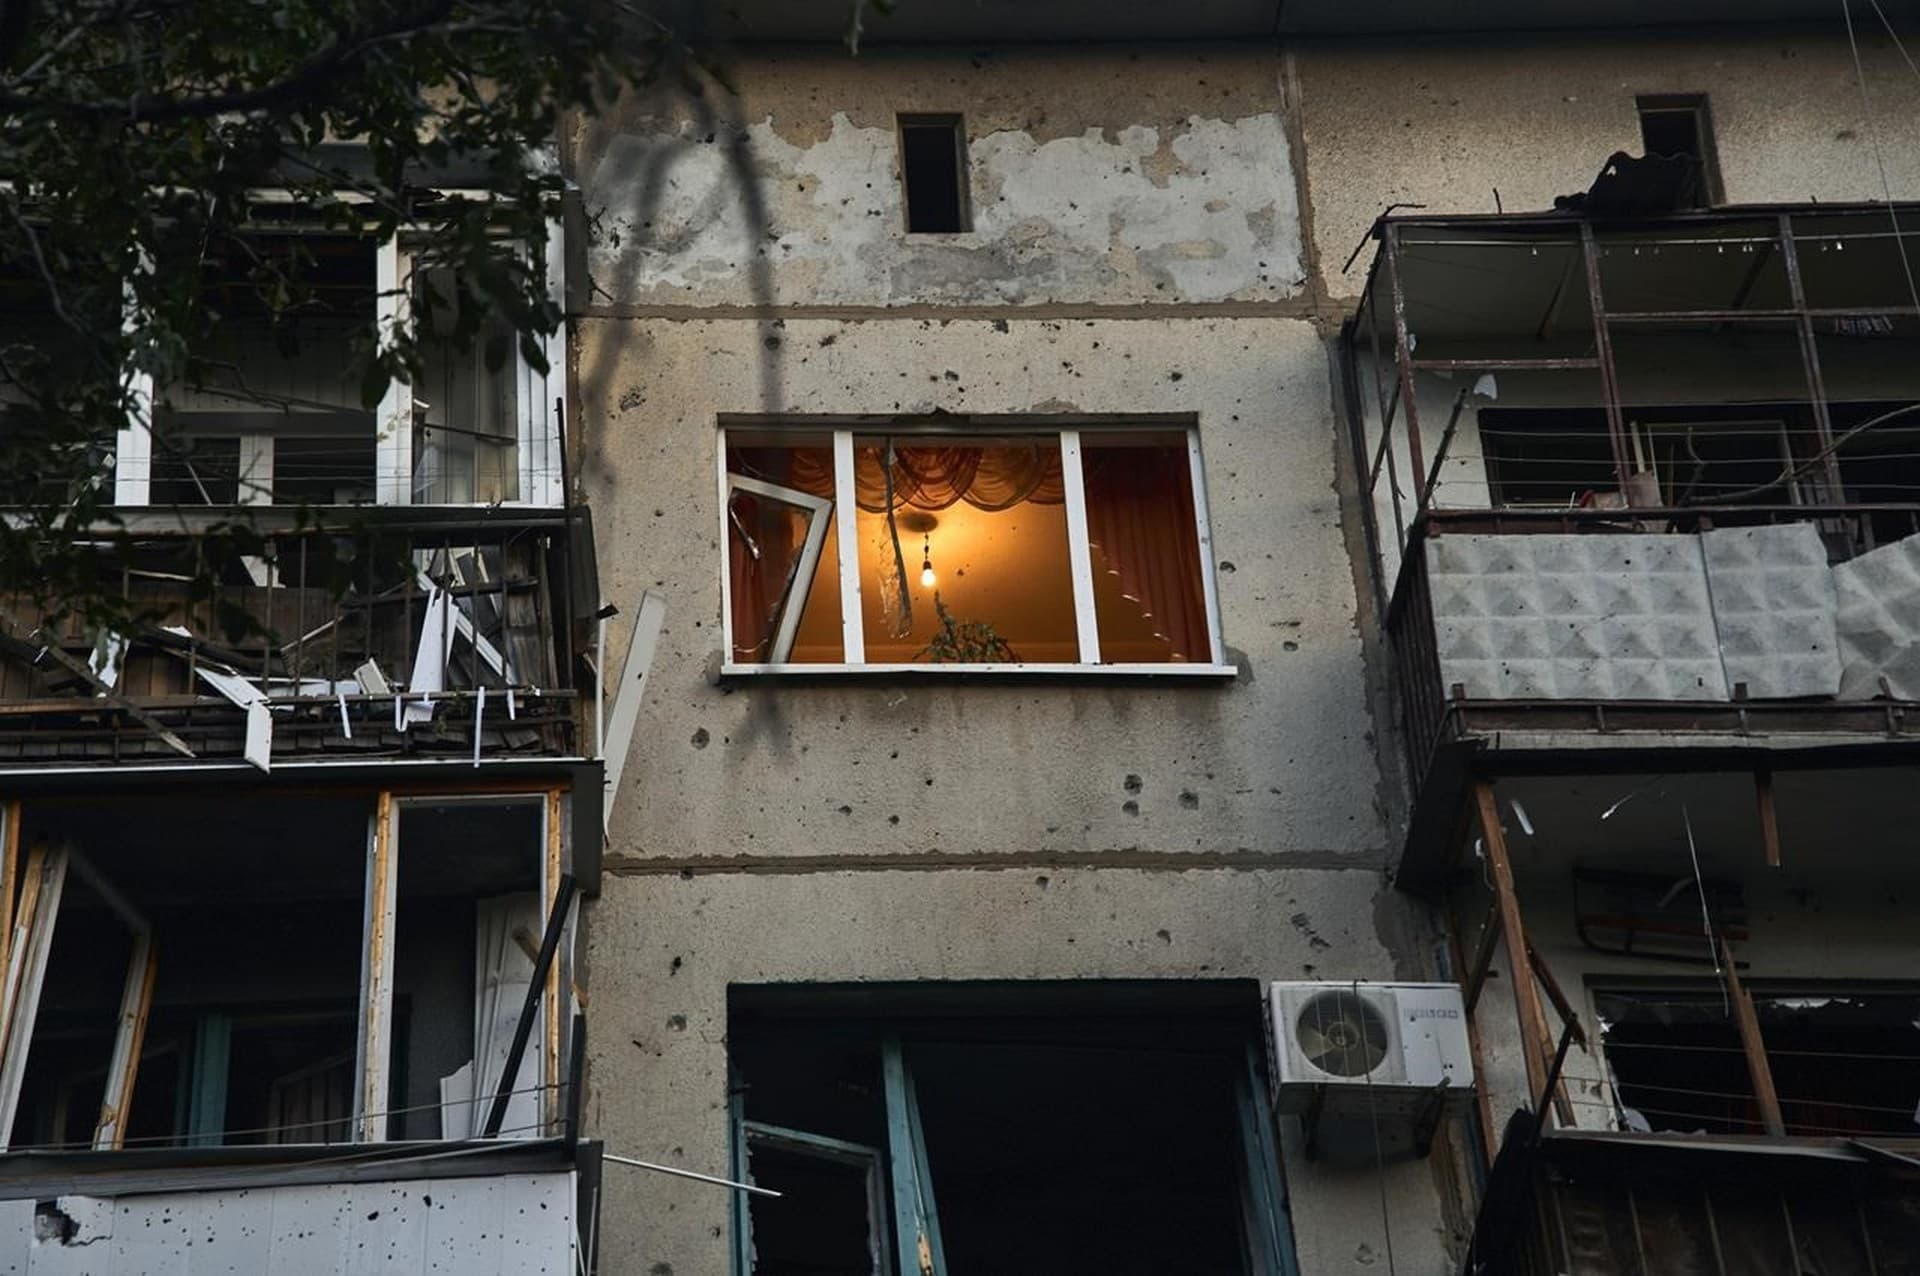 A view of a damaged building after a rocket attack early Wednesday morning, in Kramatorsk